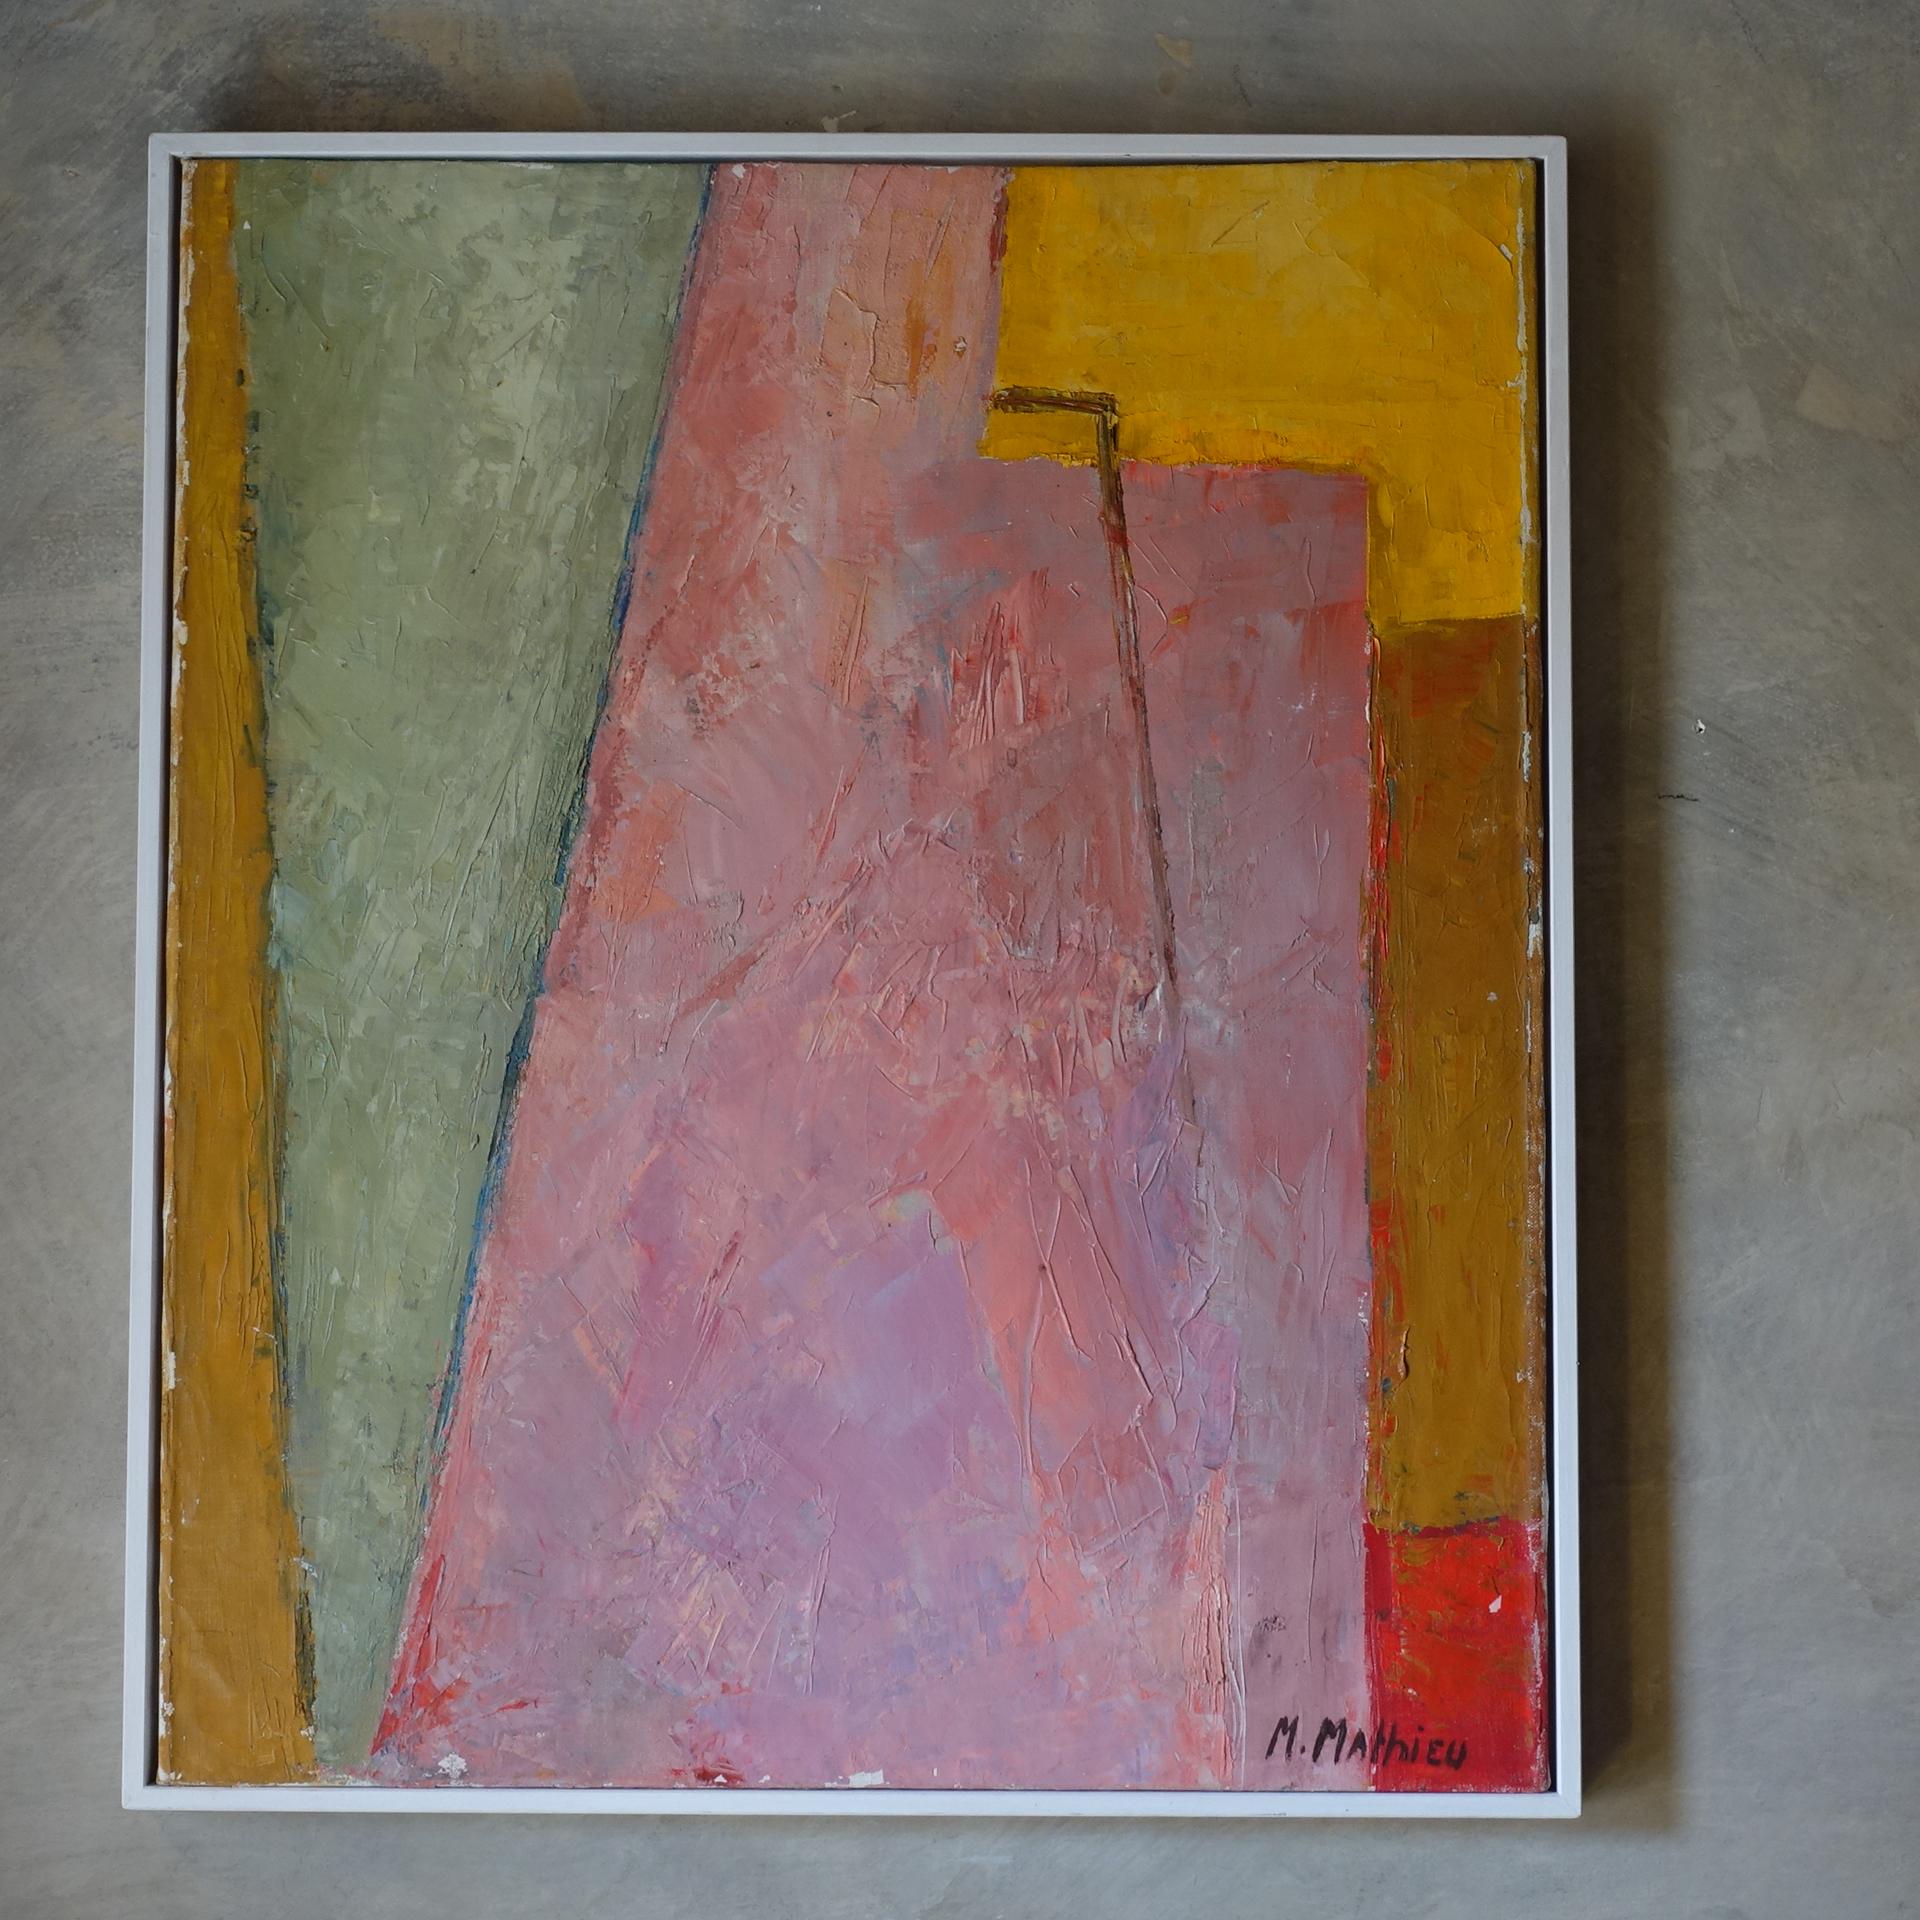 1970s French abstract painting, colored acrylics on canvas, white wood frame Signed M.Mathieu.